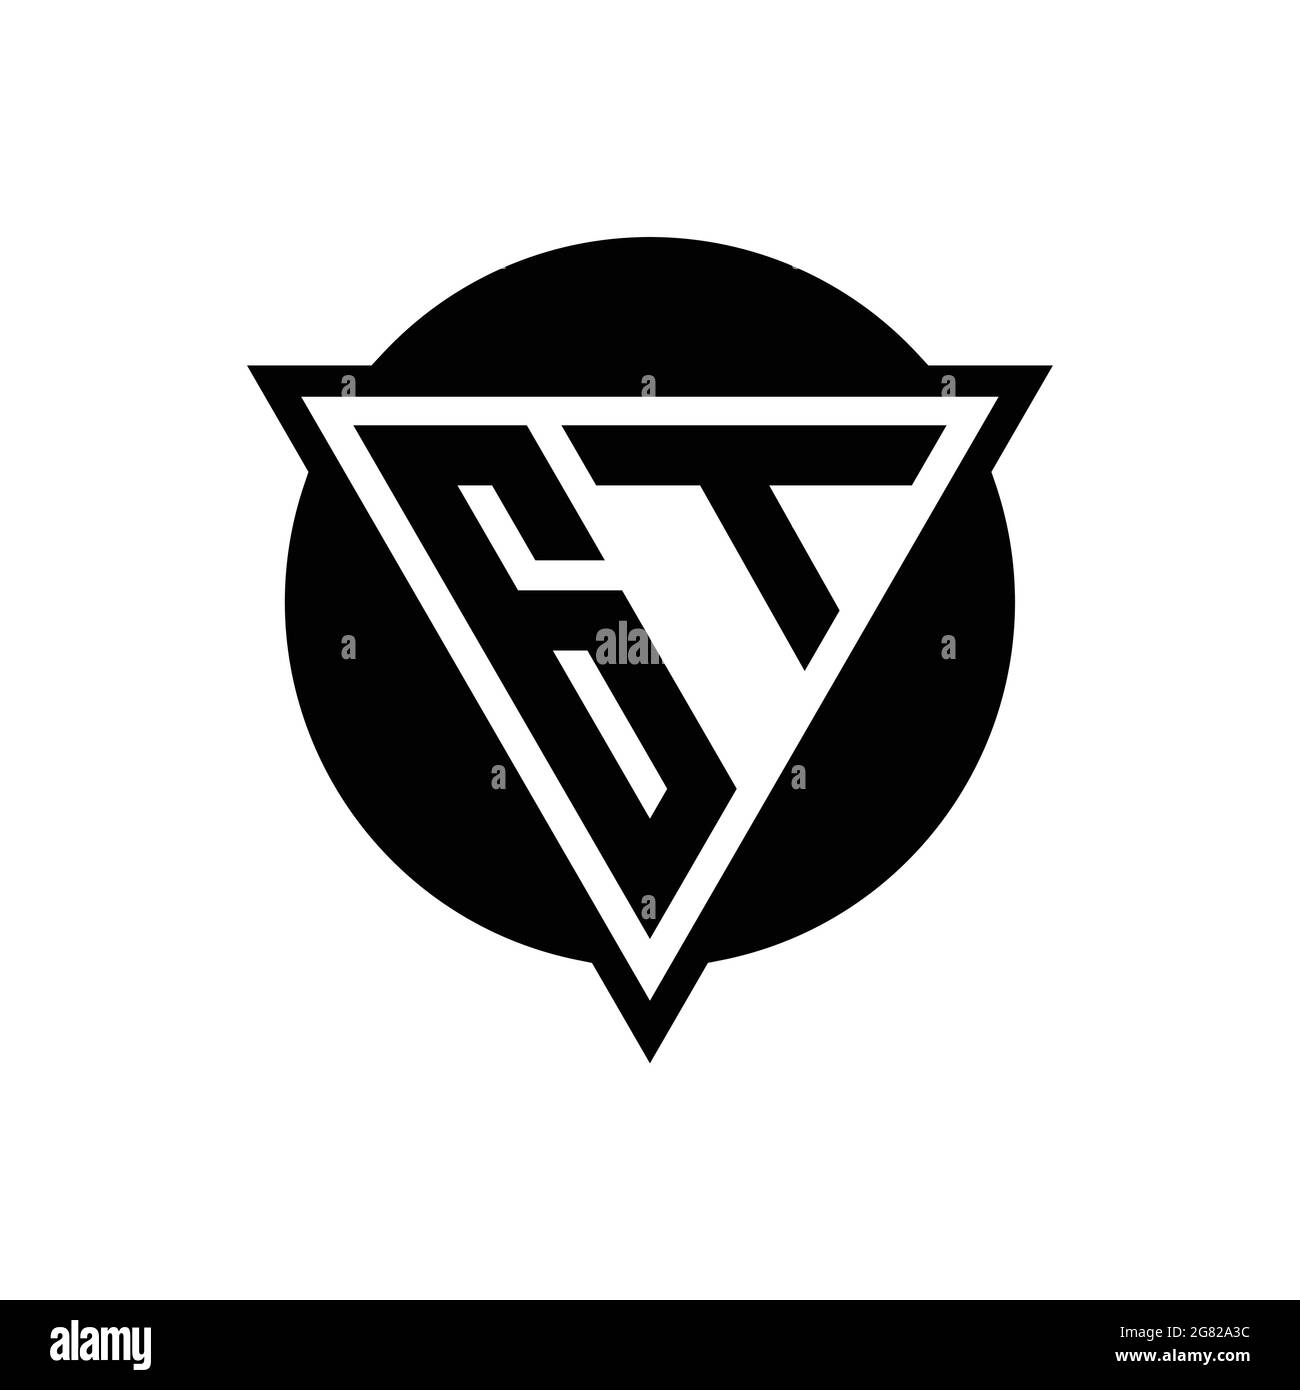 GT logo with negative space triangle and circle shape design template ...